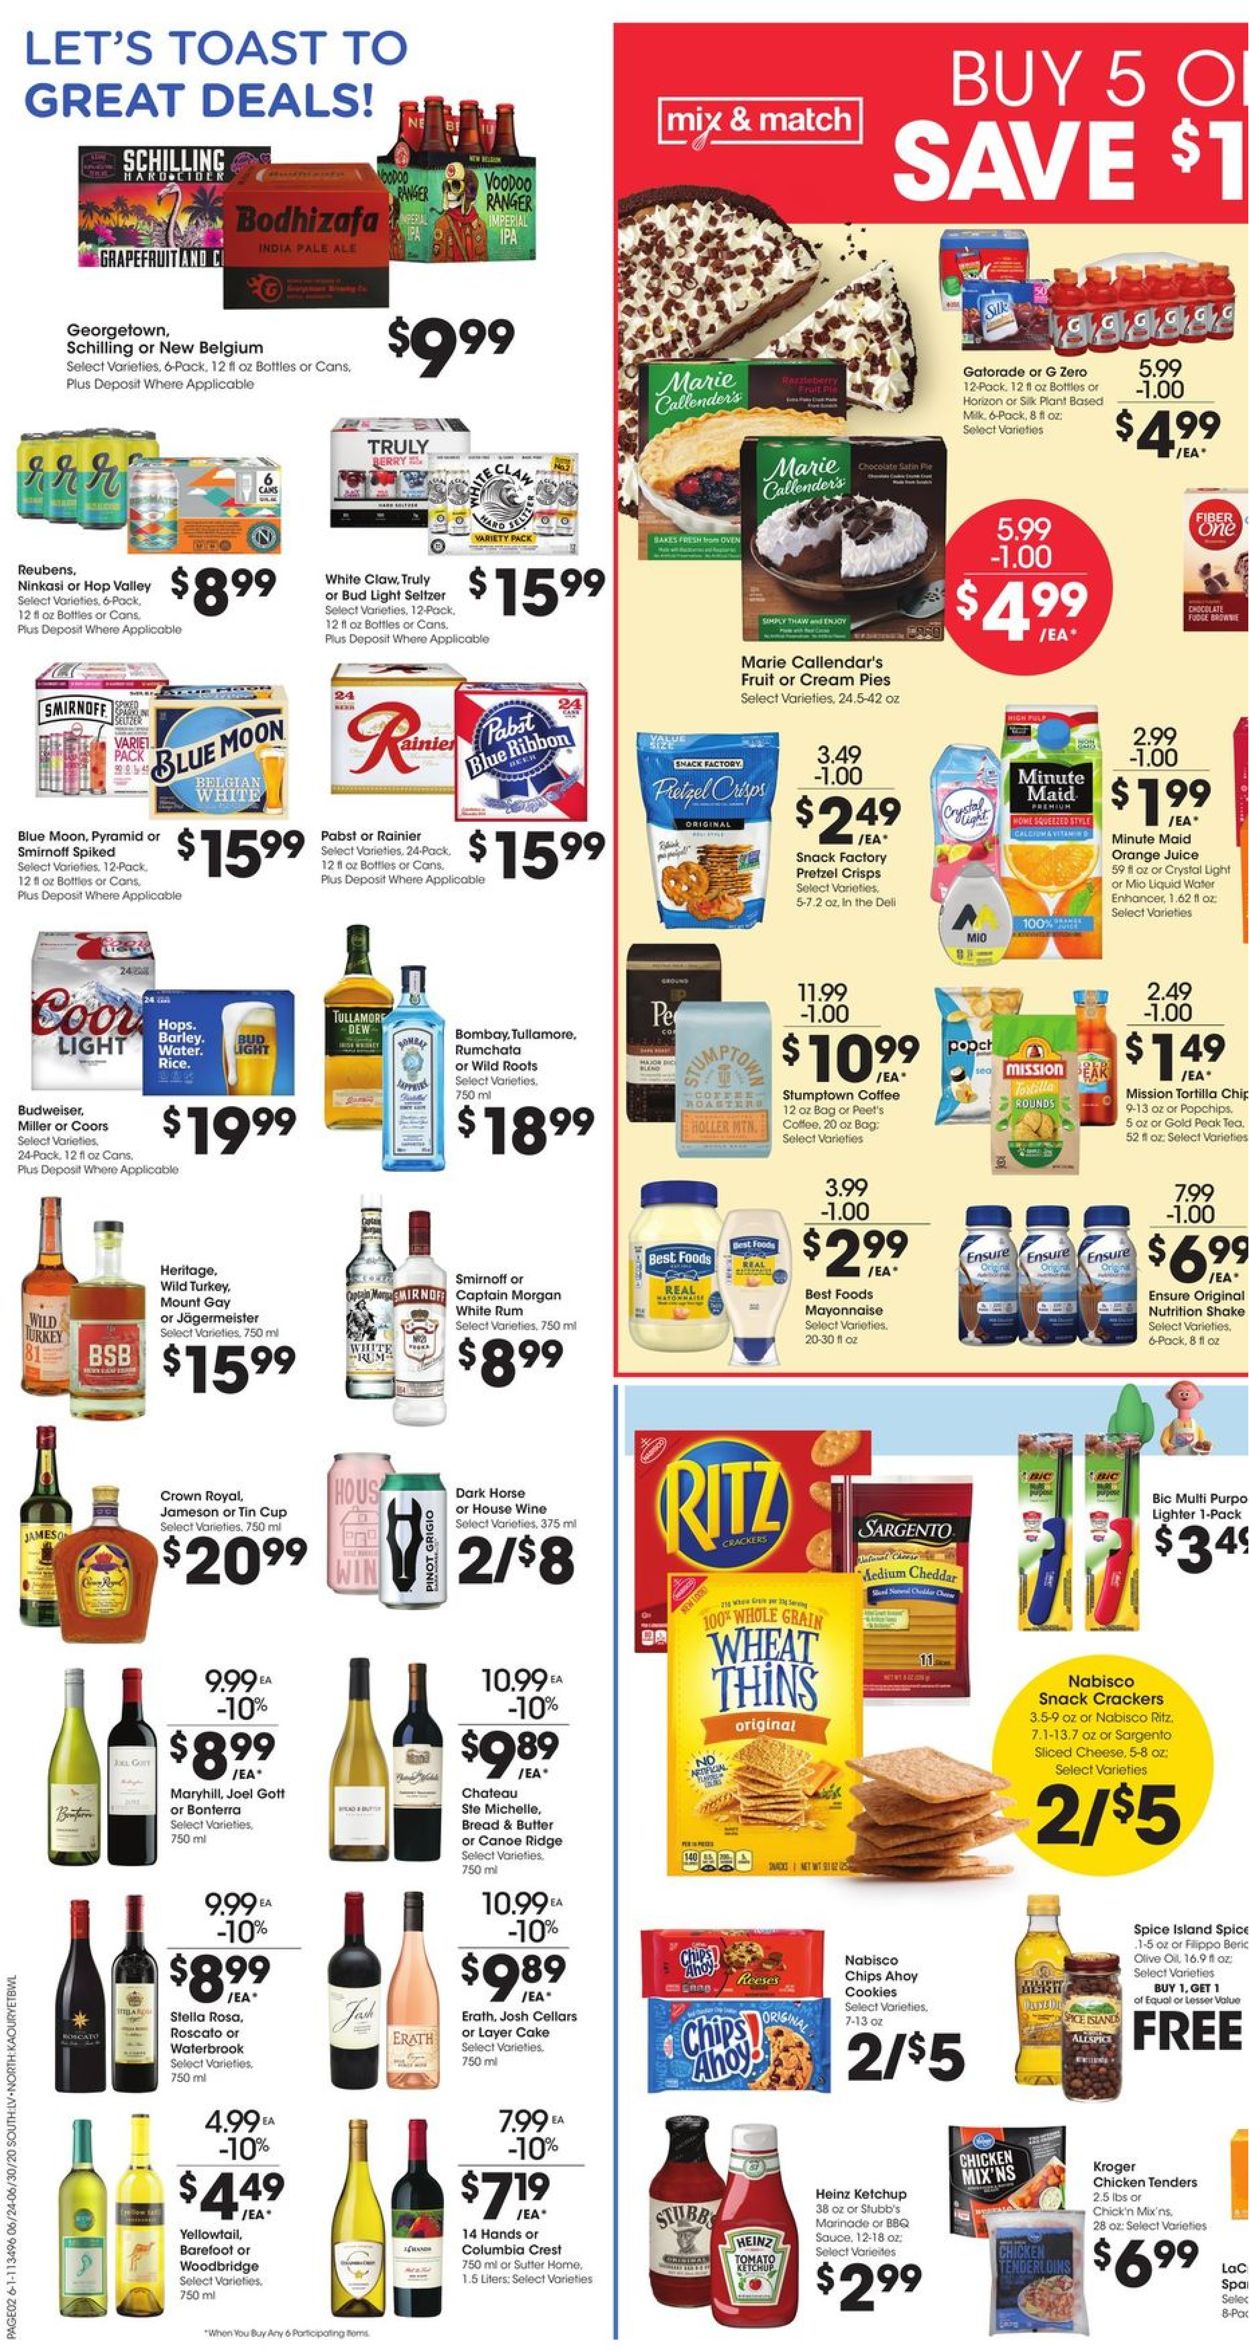 Fred Meyer Current weekly ad 06/24 - 06/30/2020 [2] - frequent-ads.com